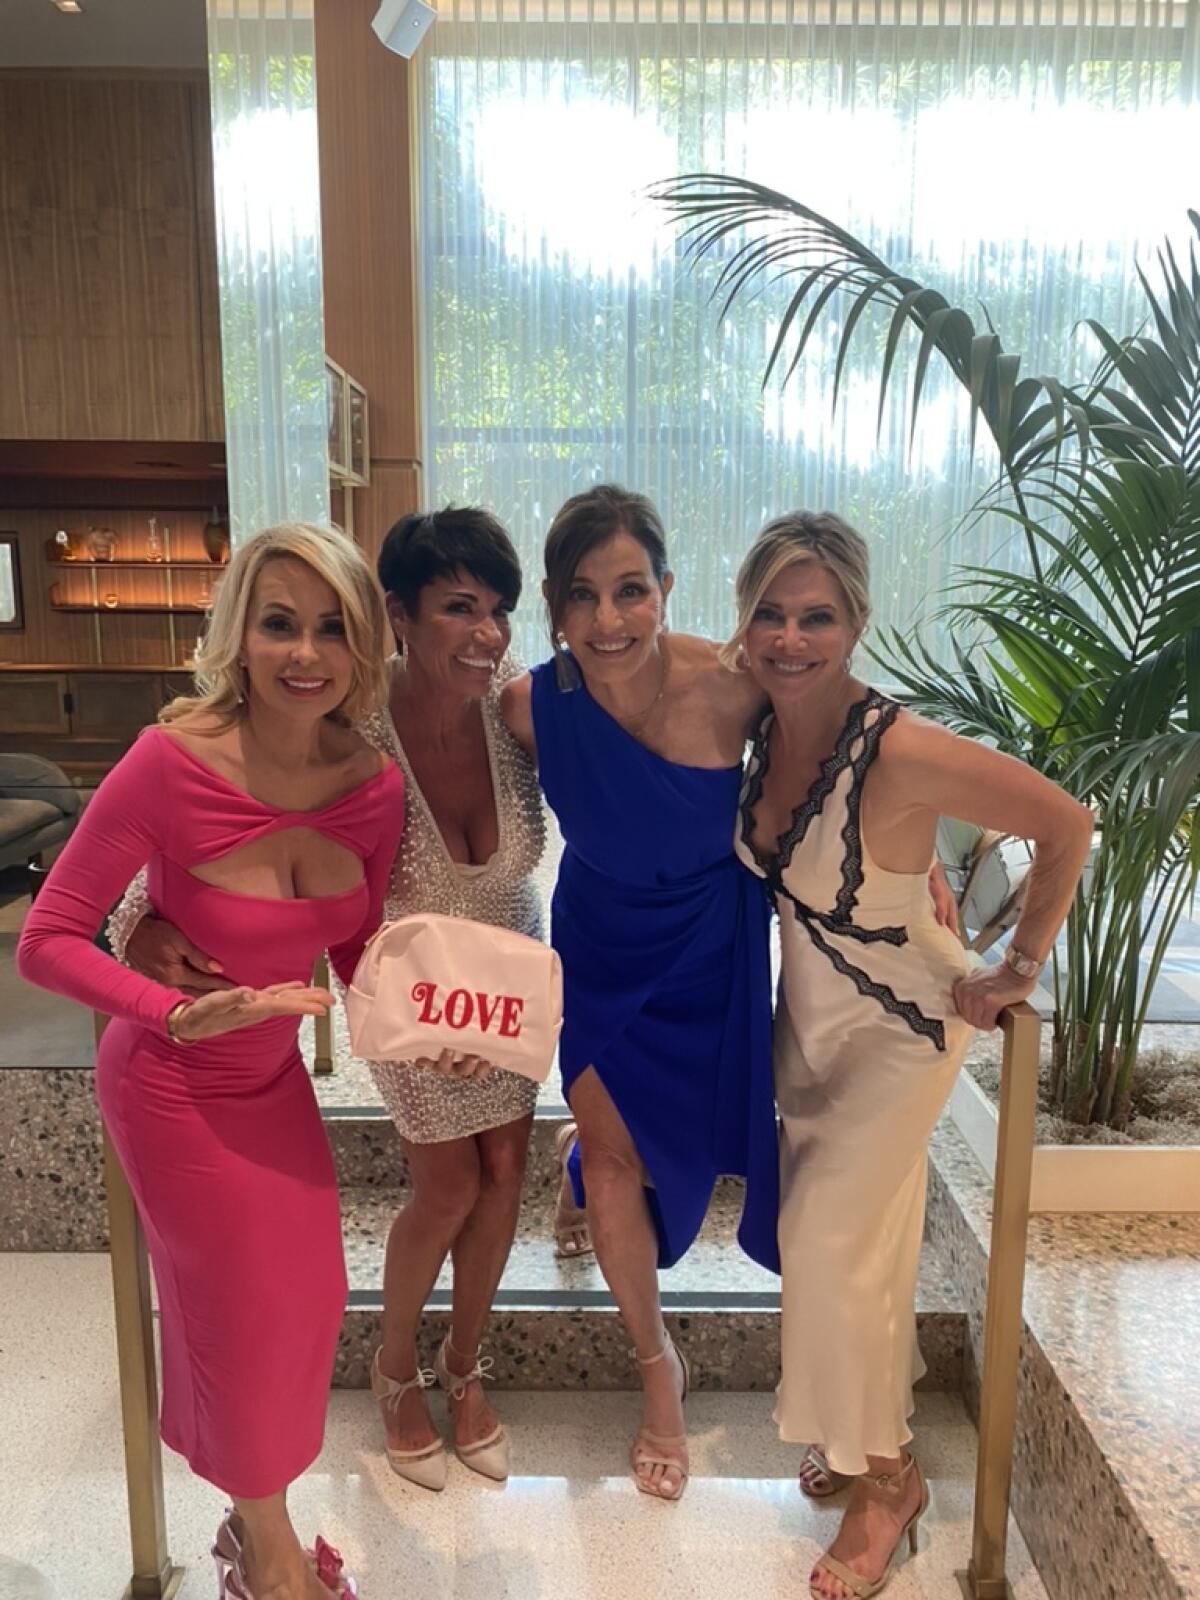 April Kirkwood holds a bag that says love and stands next to Susan Noles, Kathy Swarts and Nancy Holkower in front of stairs.